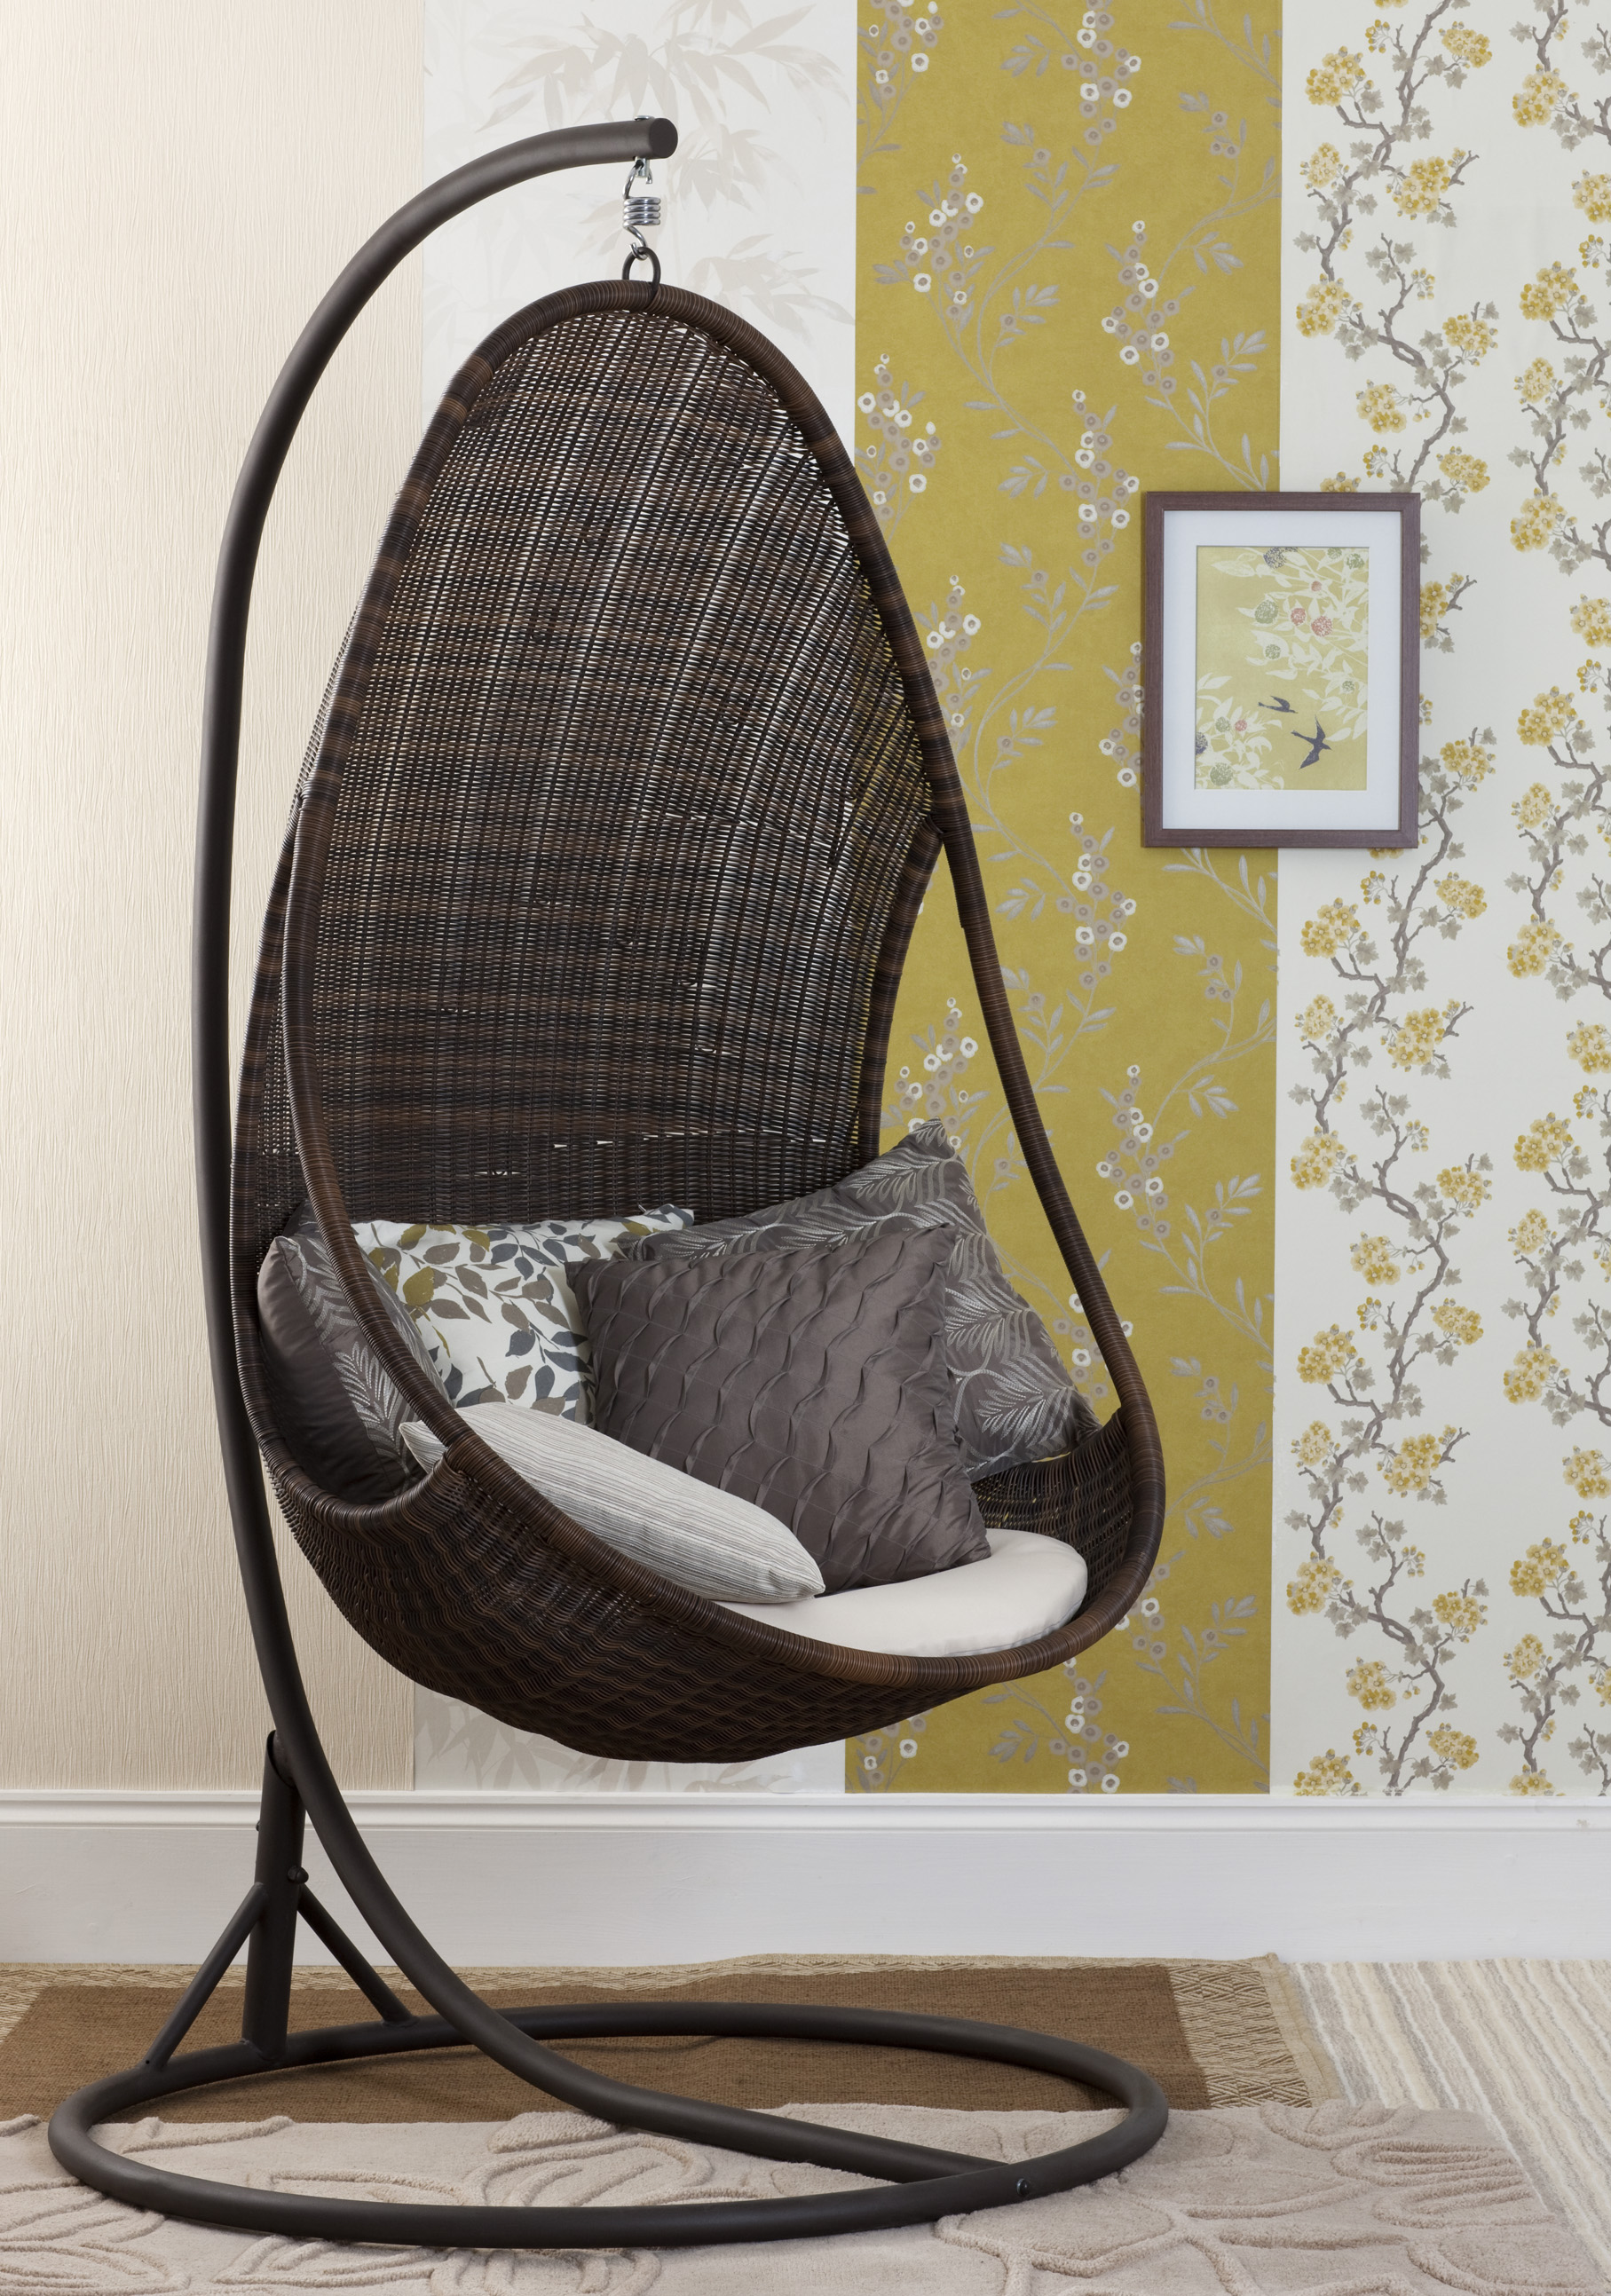 Range Of Wallpaper And Cushions With Pale Ochre Lime Shades For A